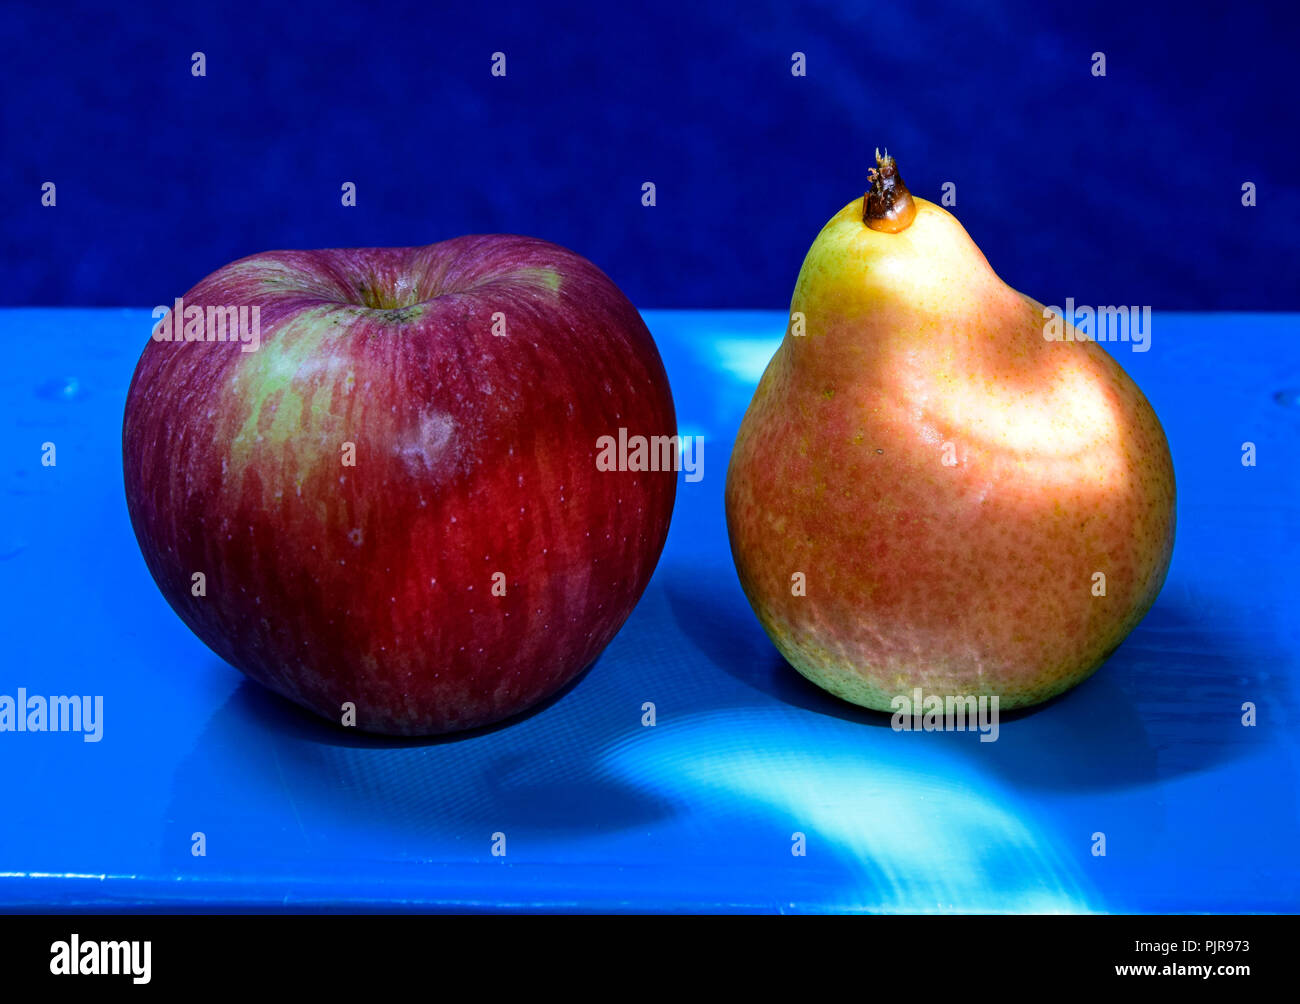 A streaked red apple and a yellow pear on a blue table on blue background in close-up lateral view Stock Photo